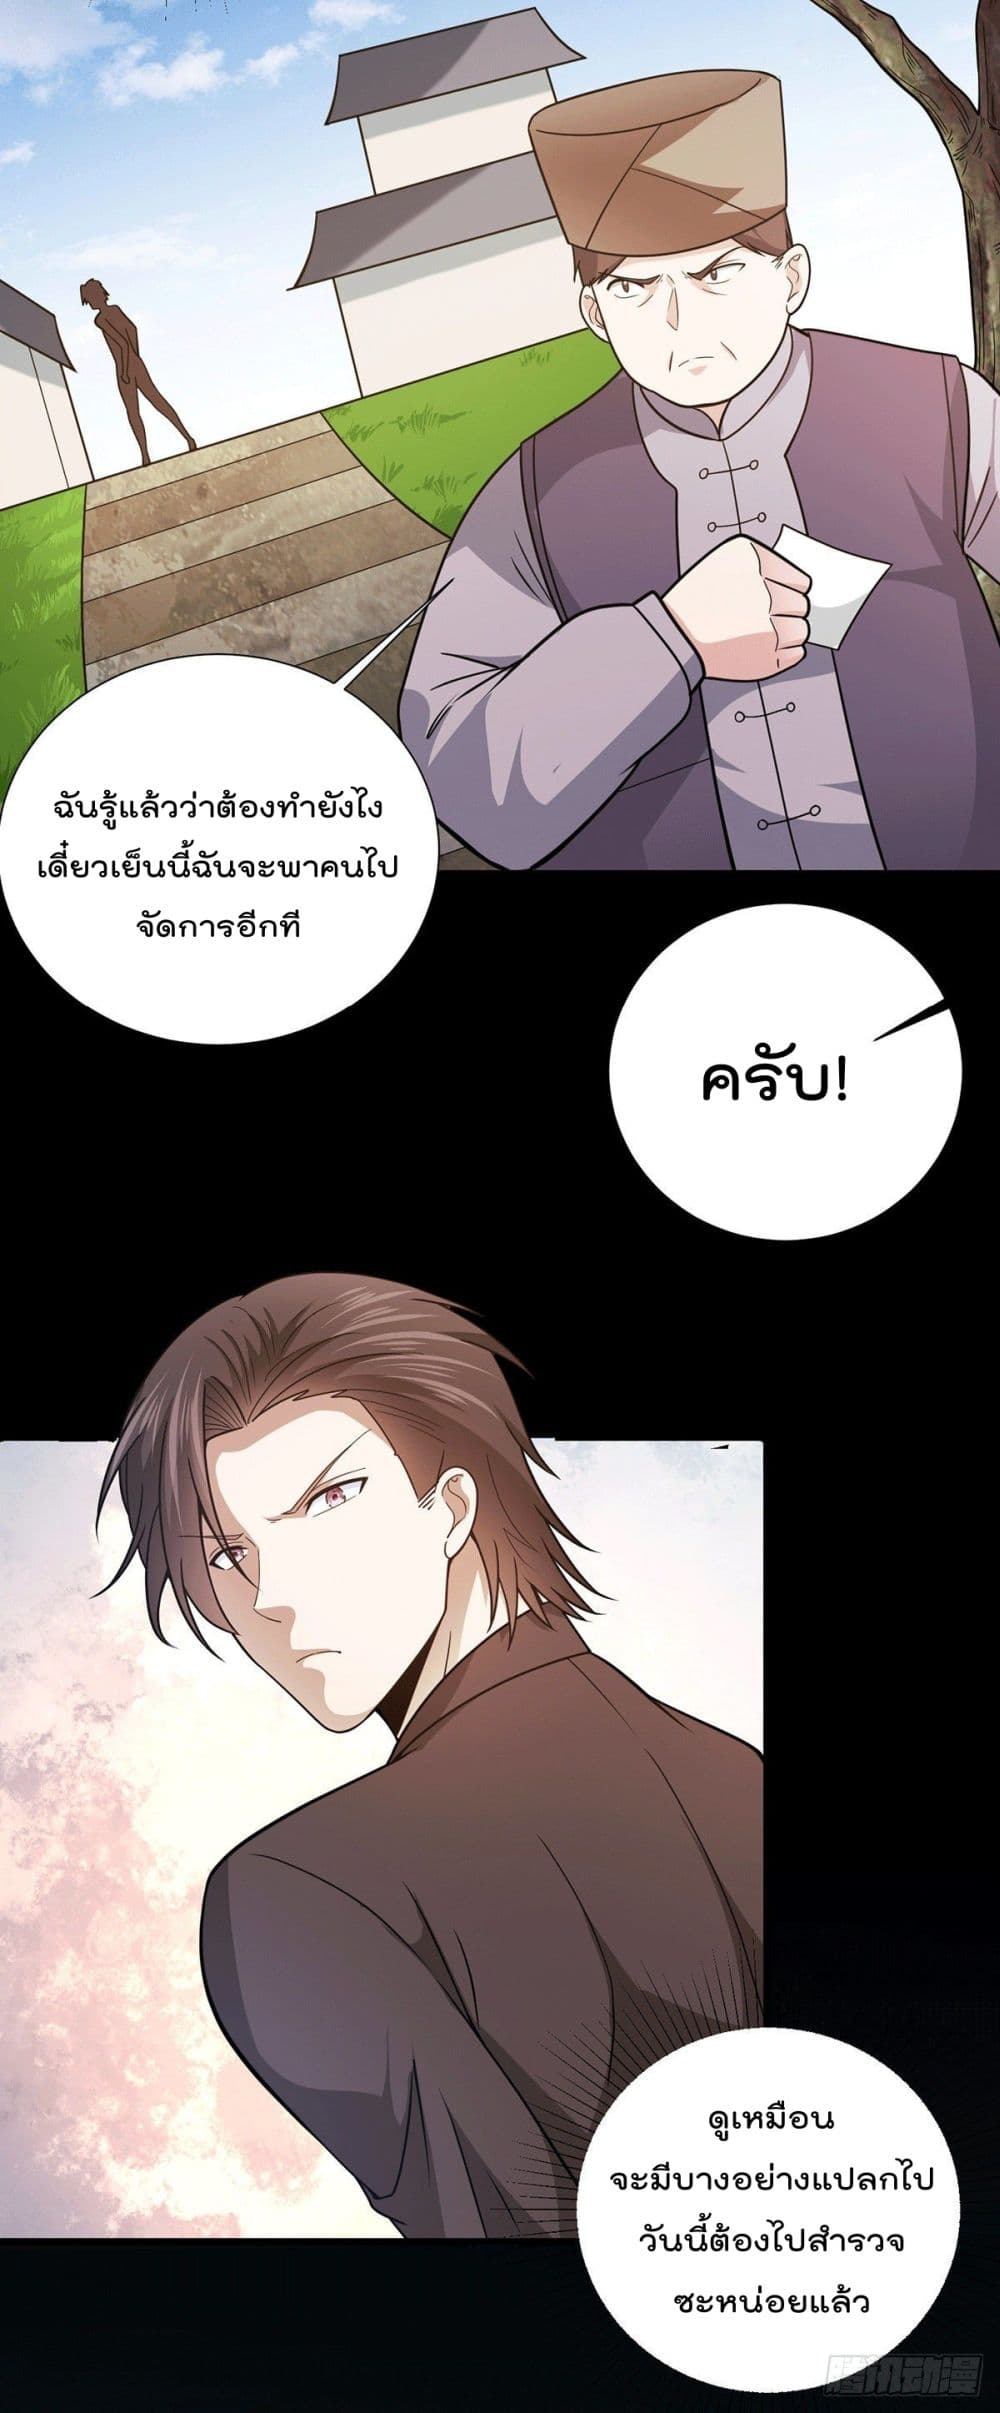 God Dragon of War in The City 66 (5)